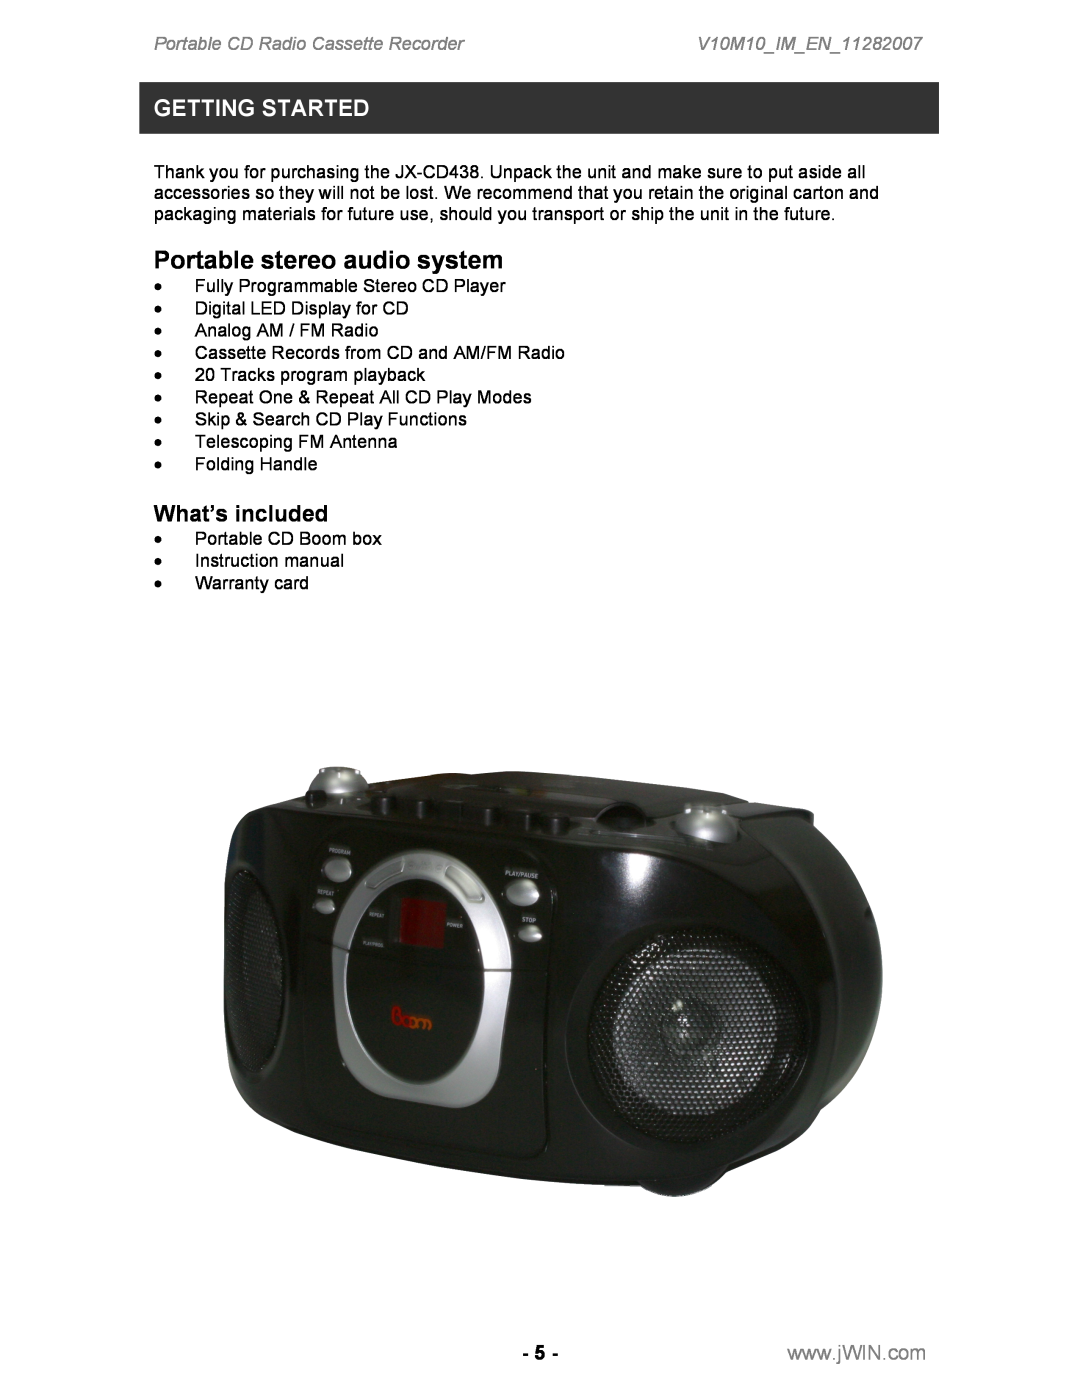 Jwin JX-CD483 Getting Started, What’s included, Portable stereo audio system, Portable CD Radio Cassette Recorder 